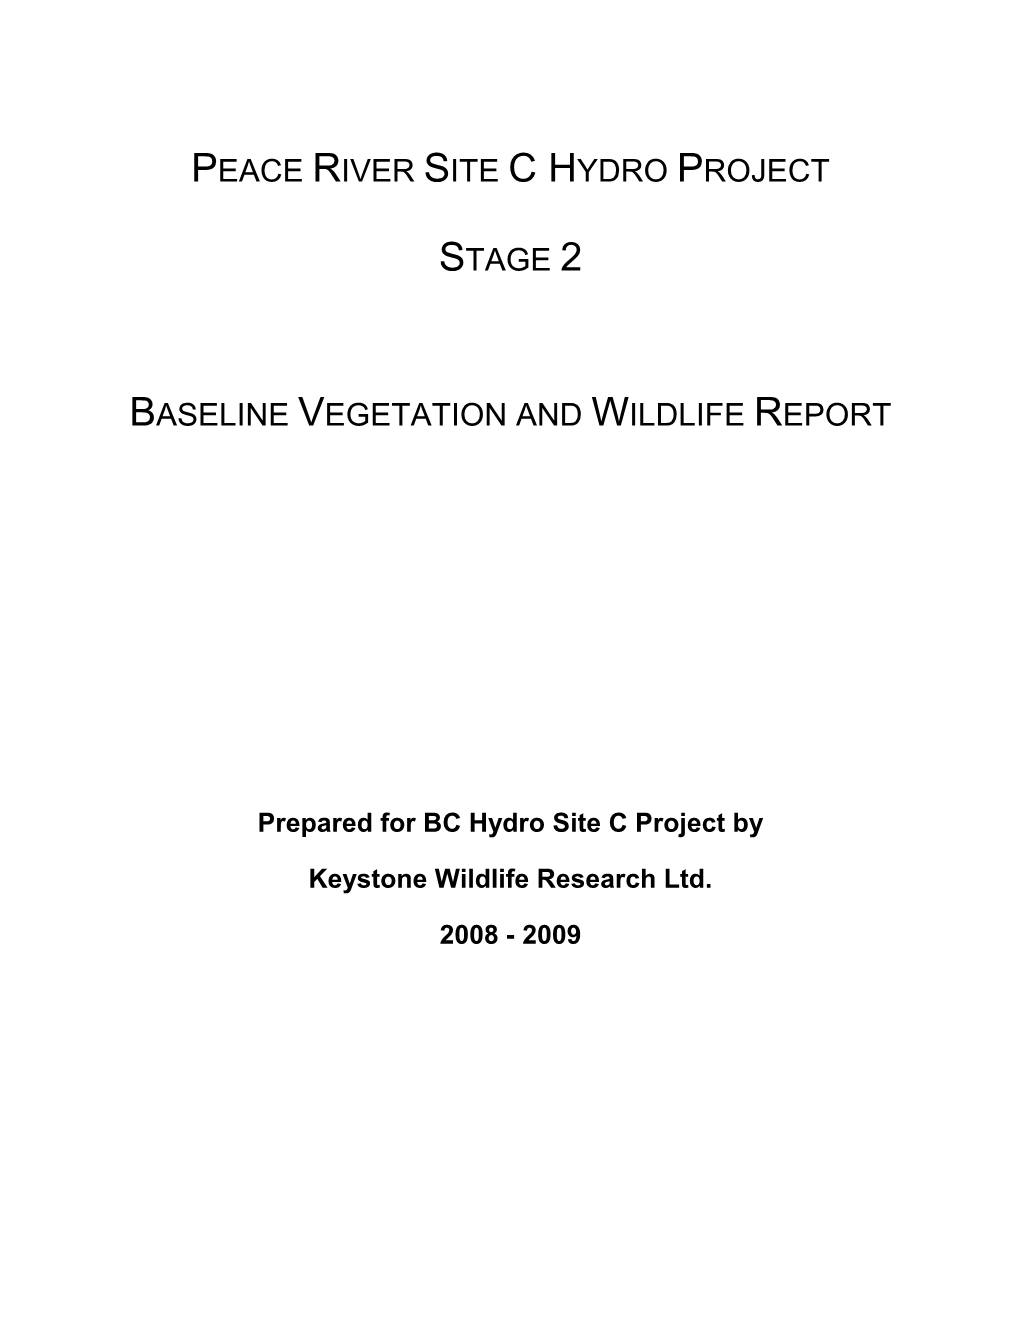 Peace River Site C Hydro Project Stage 2 Baseline